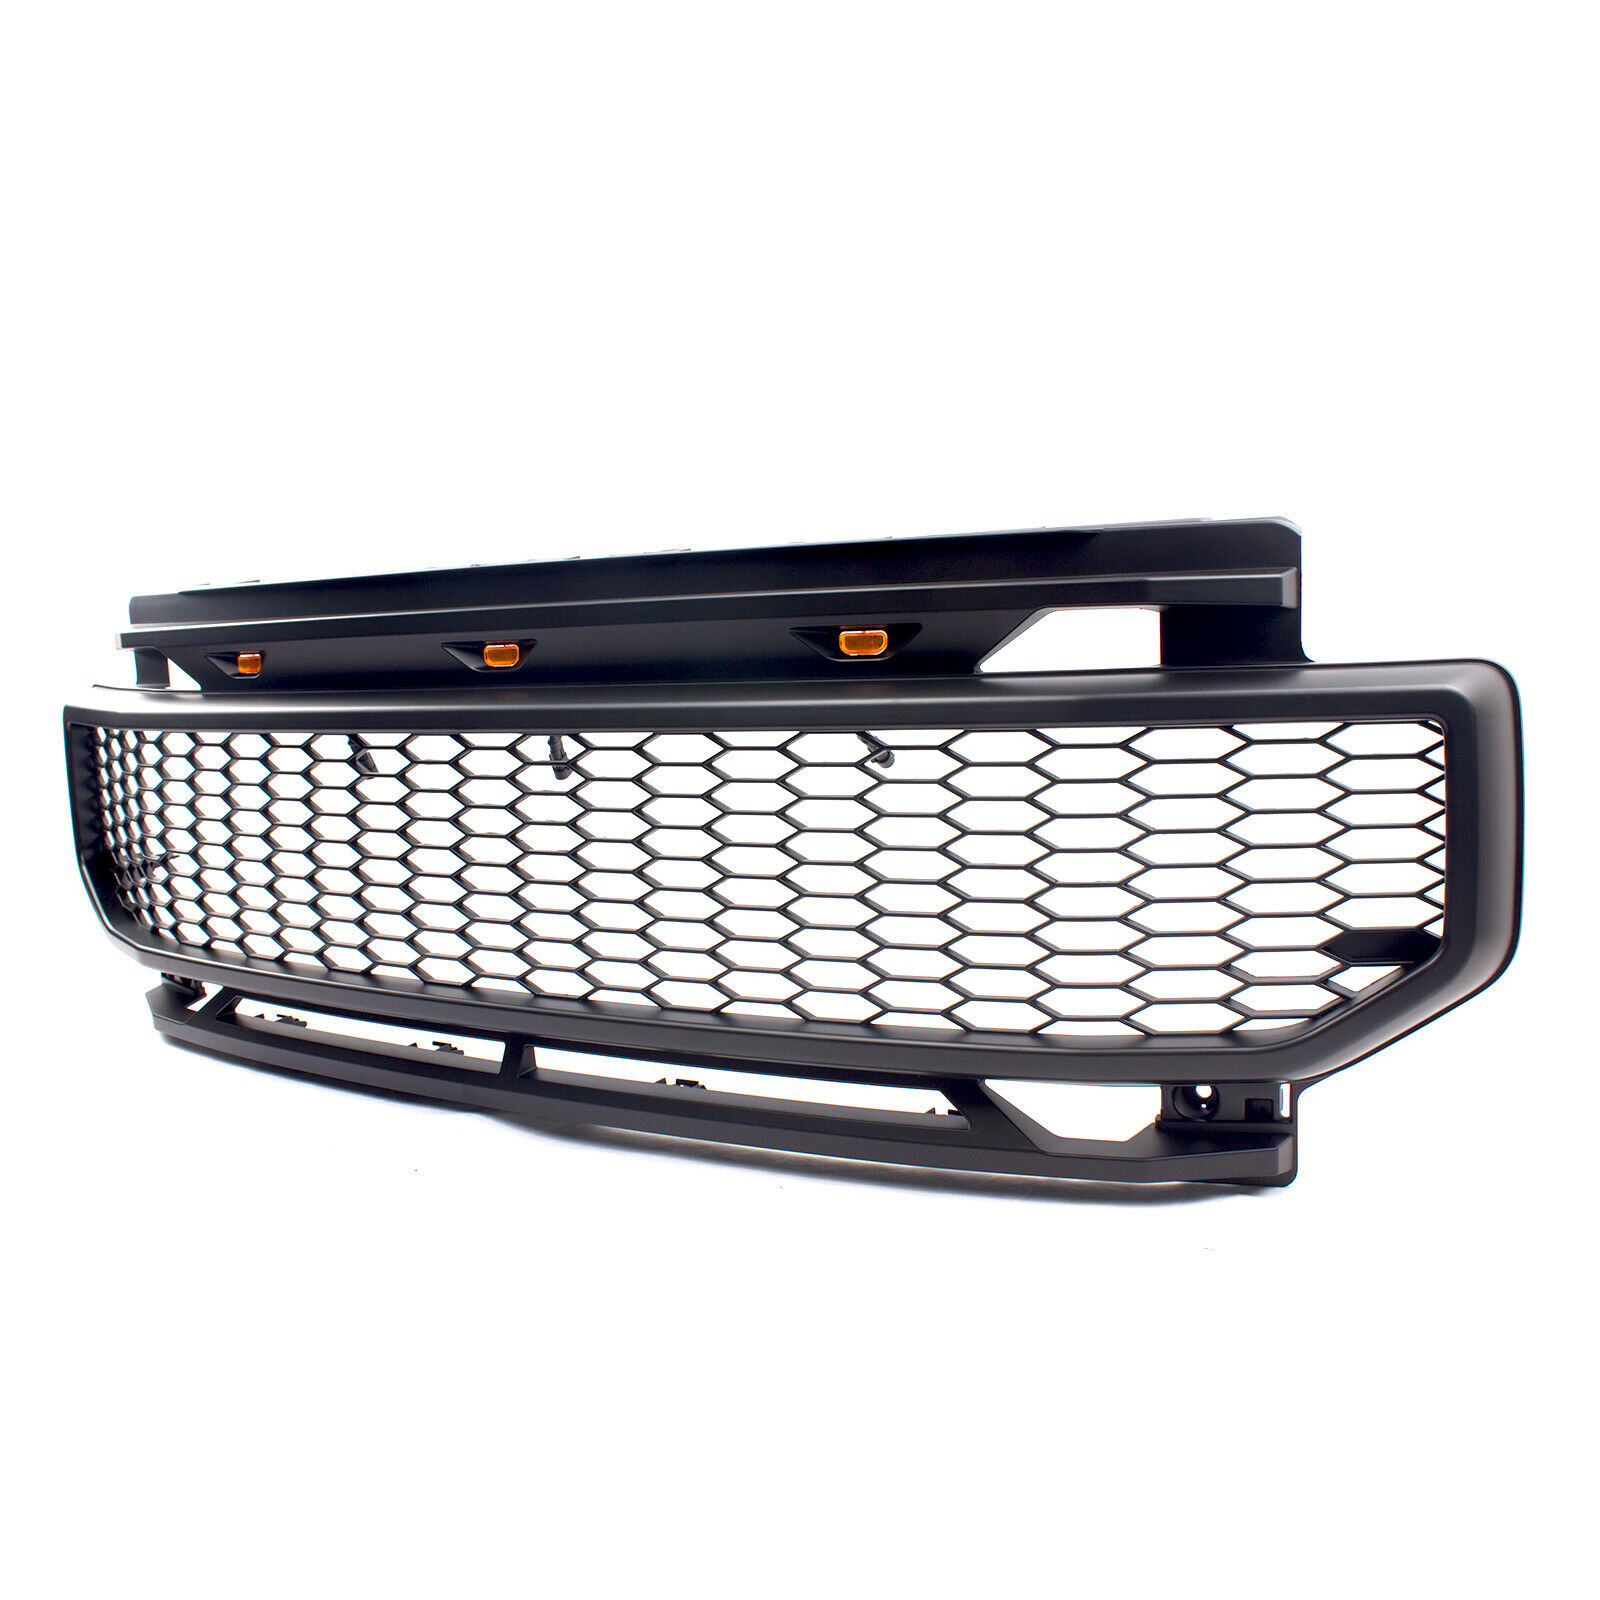 2020 Front Hood Bumper Upper Mesh Grille for F250 Grill Auto Parts Offroad 4X4 Pickup Truck Accessories